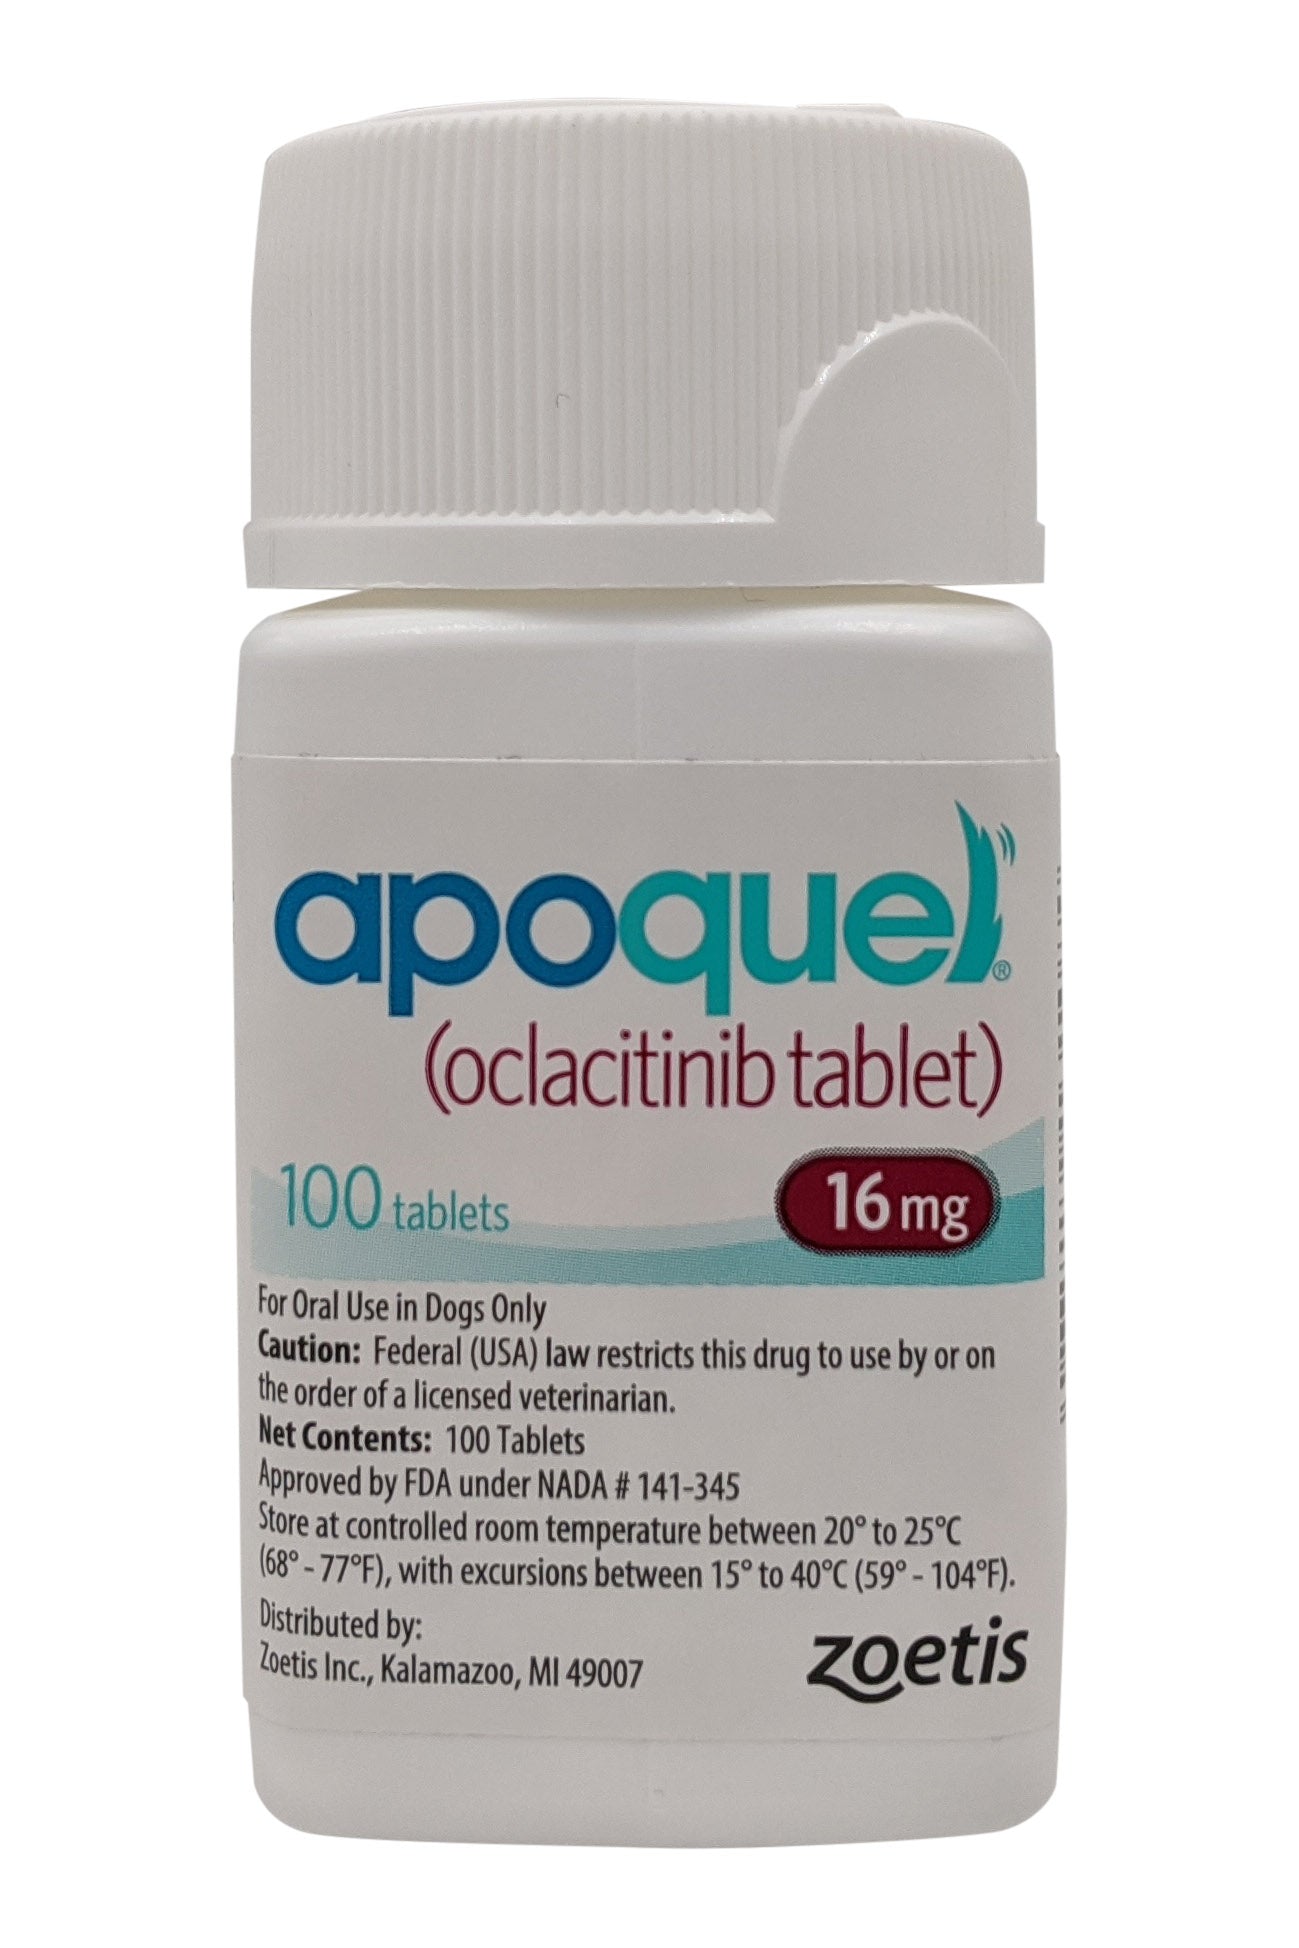 buy-apoquel-for-dogs-online-buy-pharma-md